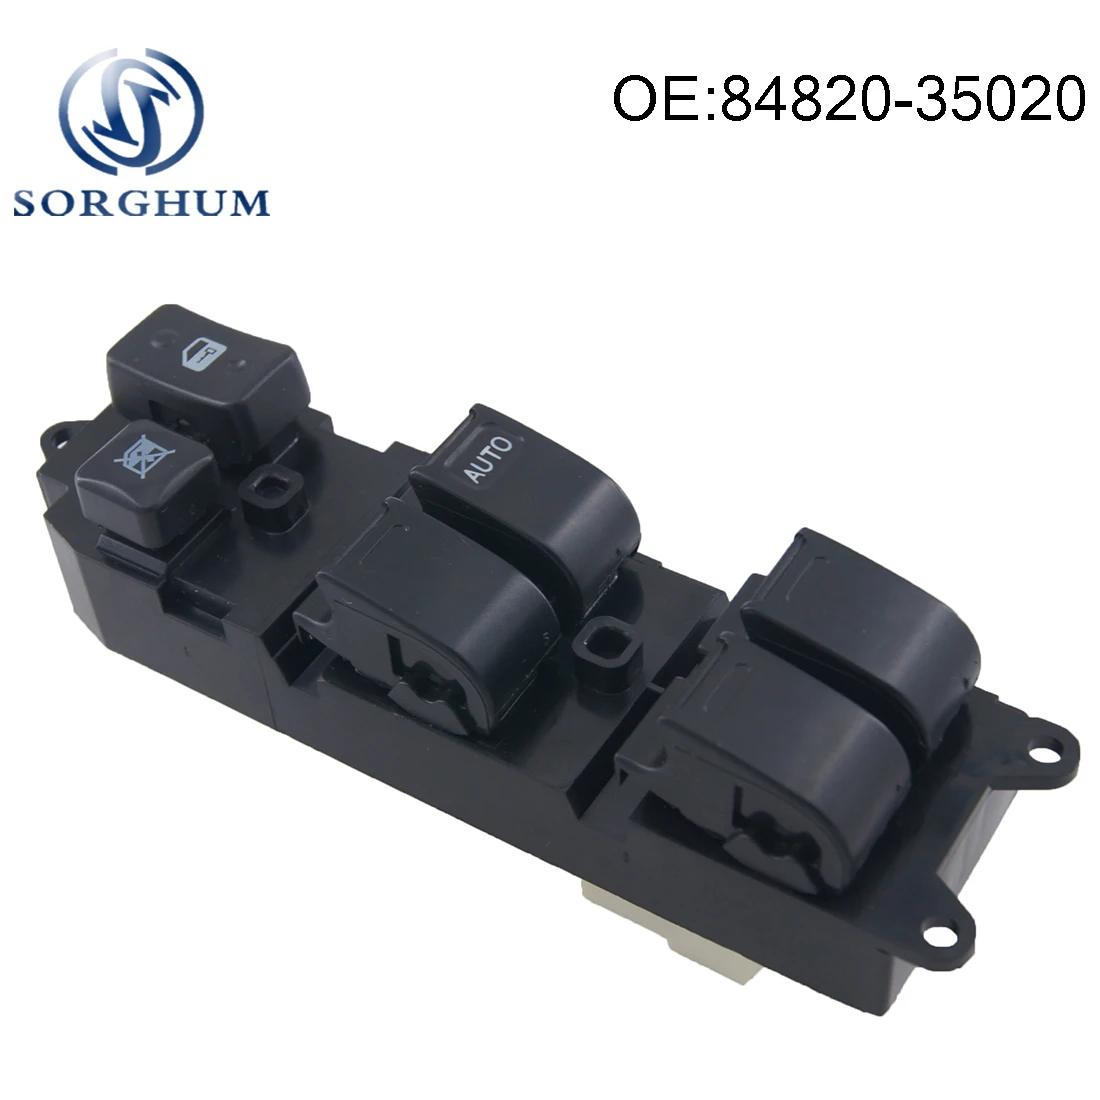 

Sorghum Power Master Window Switch Regulator 84820-35020 8482035020 For Toyota Land Cruiser 80 Series 90-98 Right Side Driver